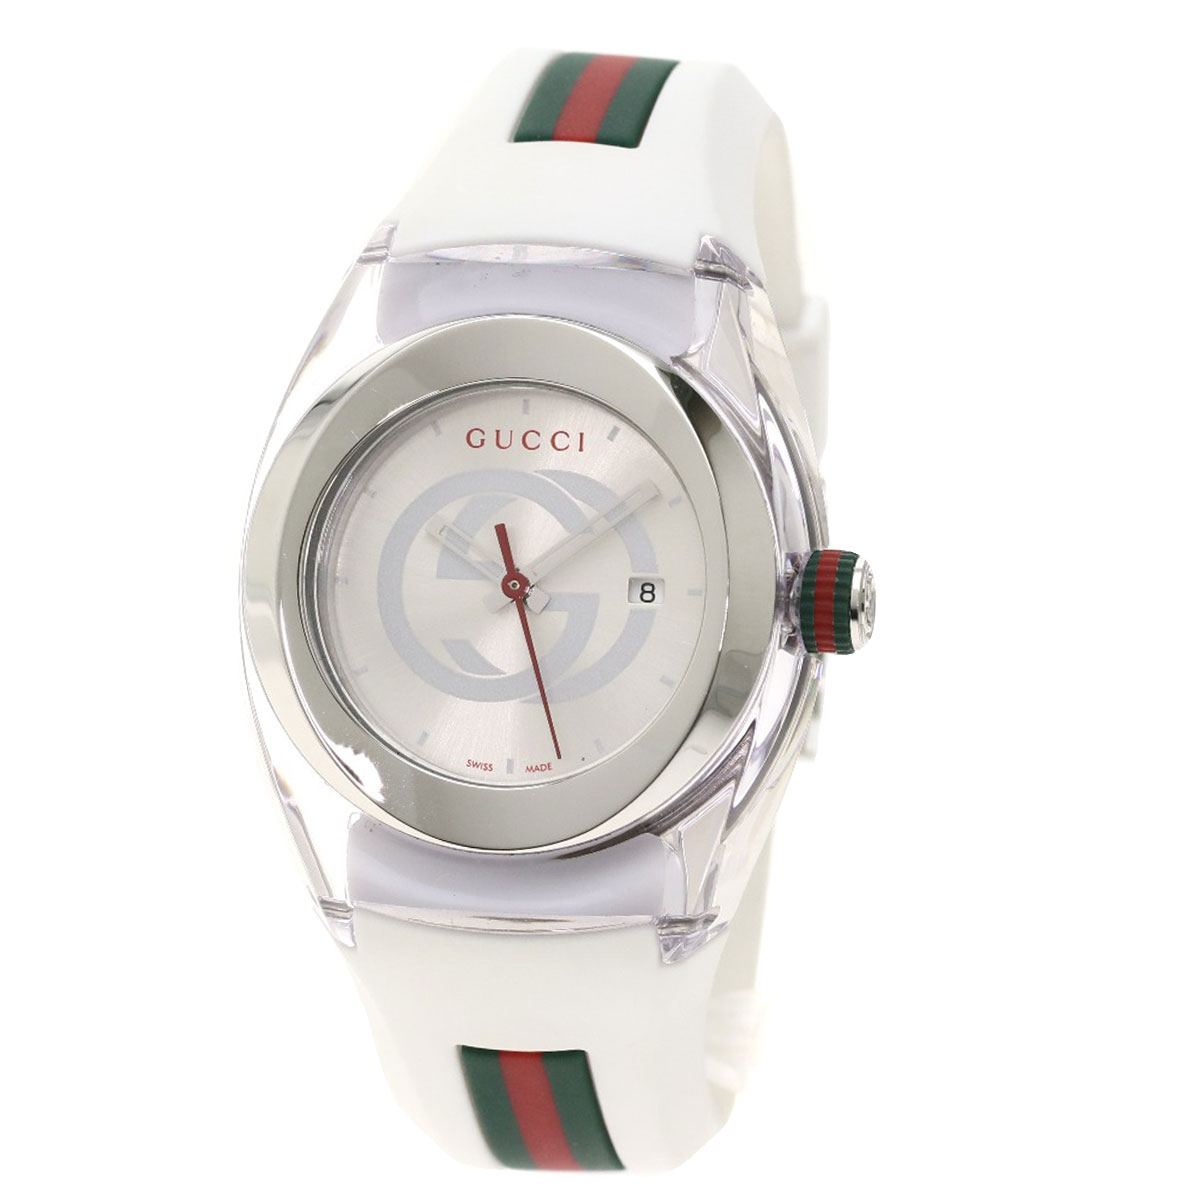 GUCCI SYNC Watches YA137302 Stainless Steel/Rubber Ladies | eBay